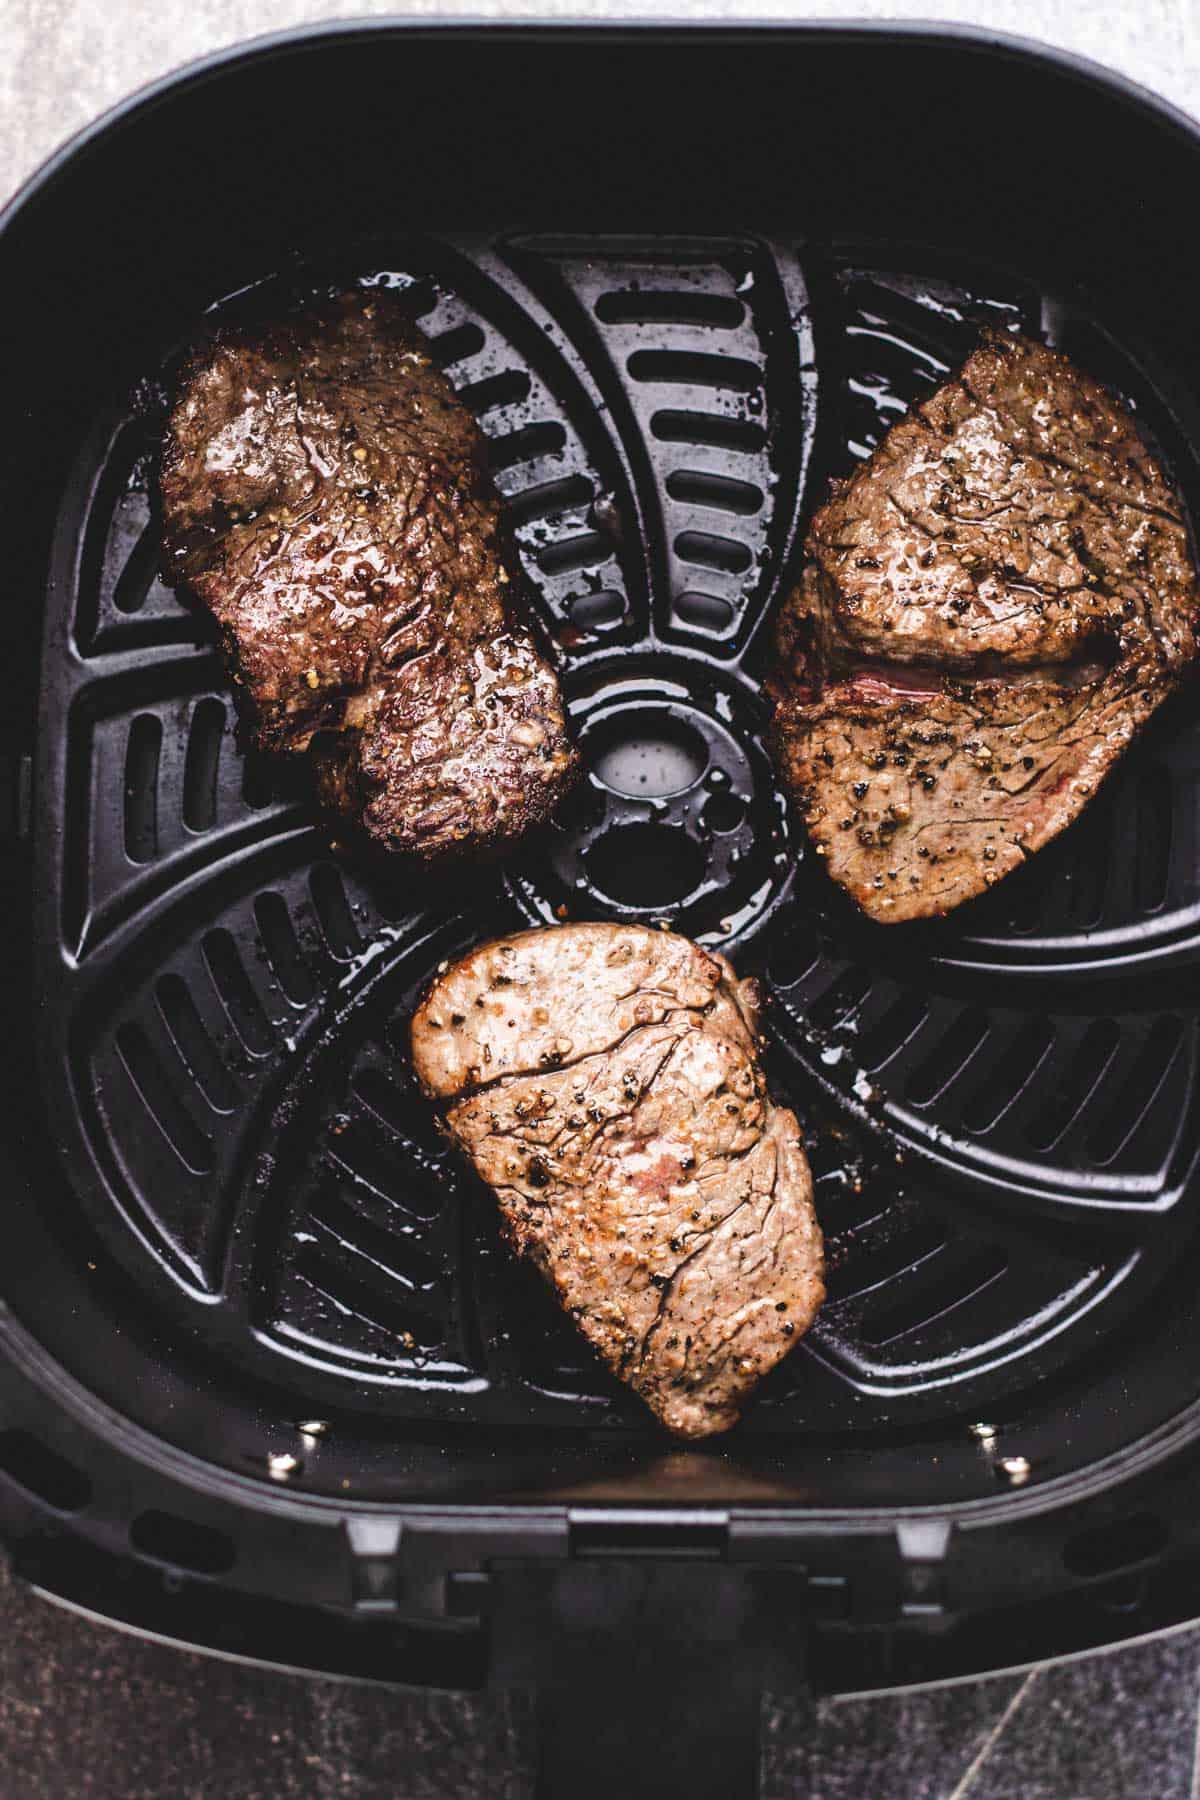 3 cooked filet mignons inside of an air fryer basket.